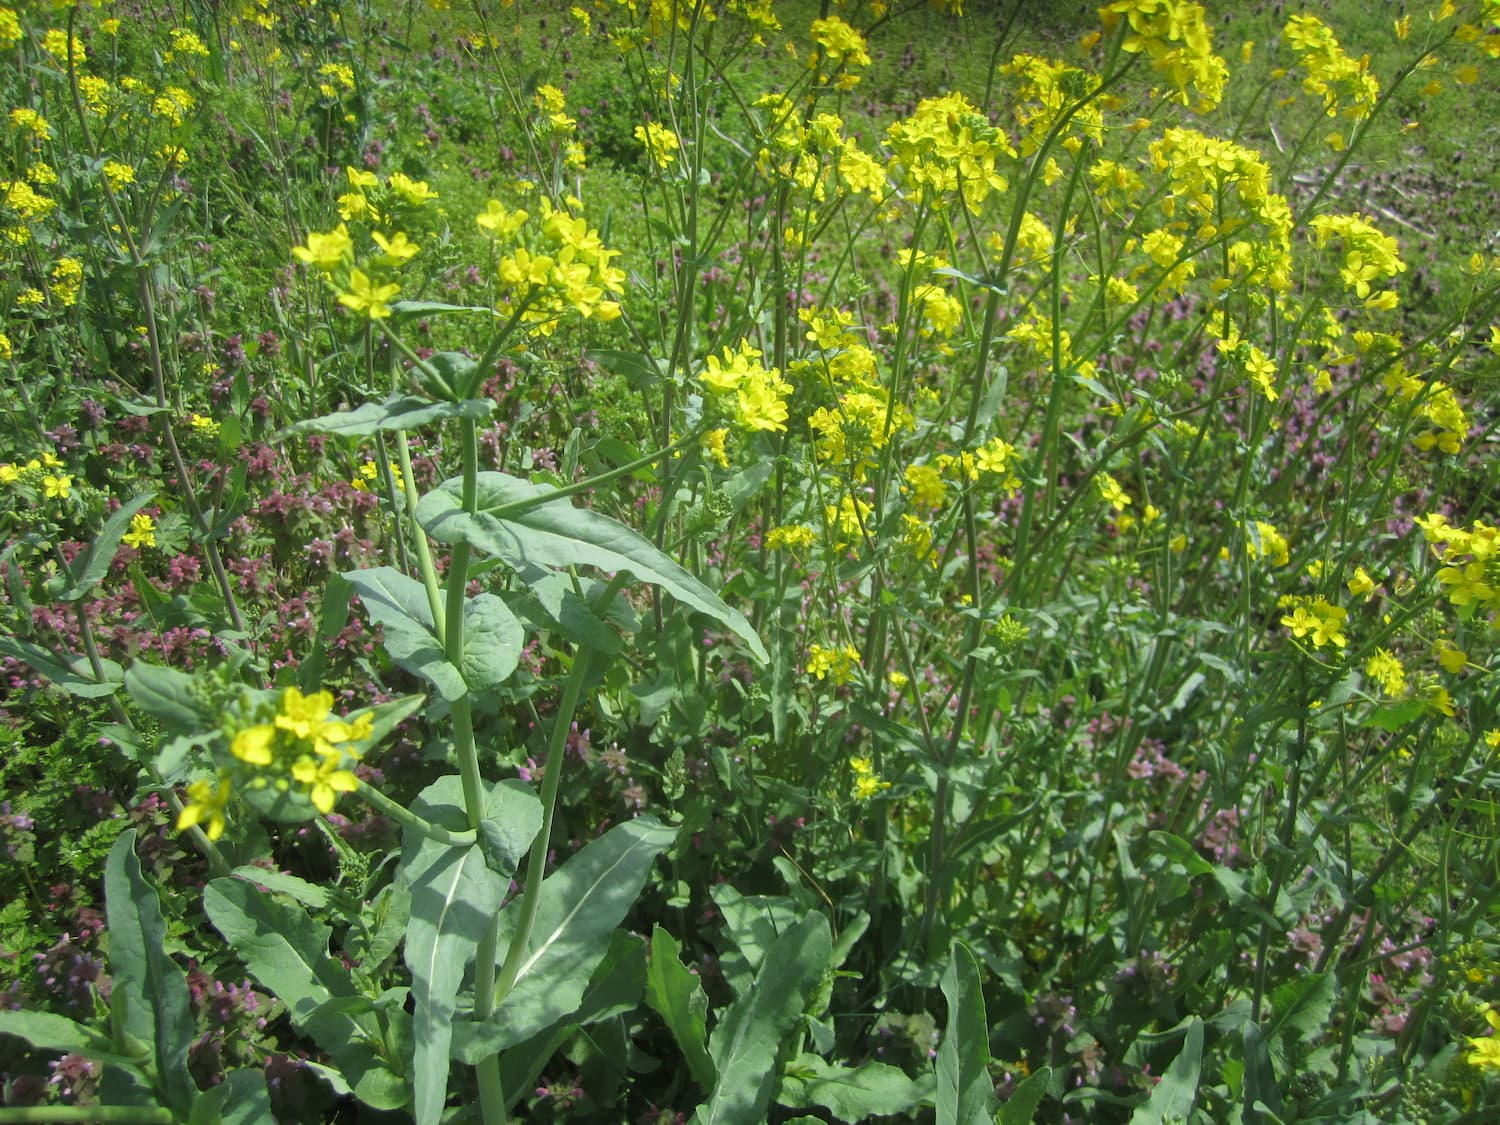 Wild mustard pictured among a patch of other herbaceous annual weeds.